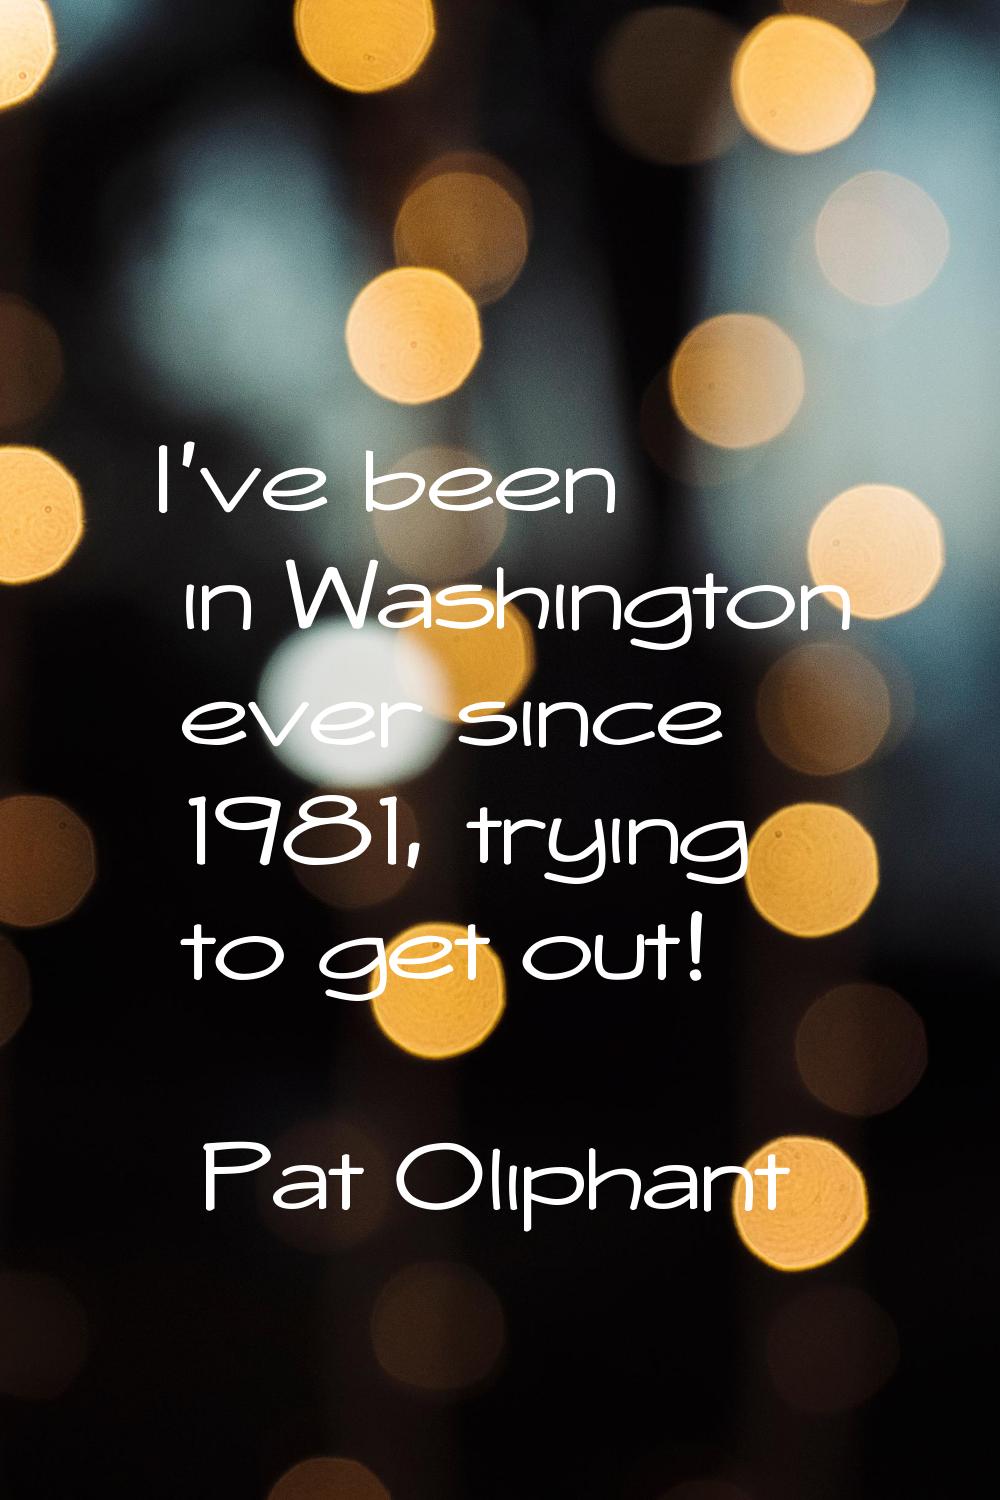 I've been in Washington ever since 1981, trying to get out!